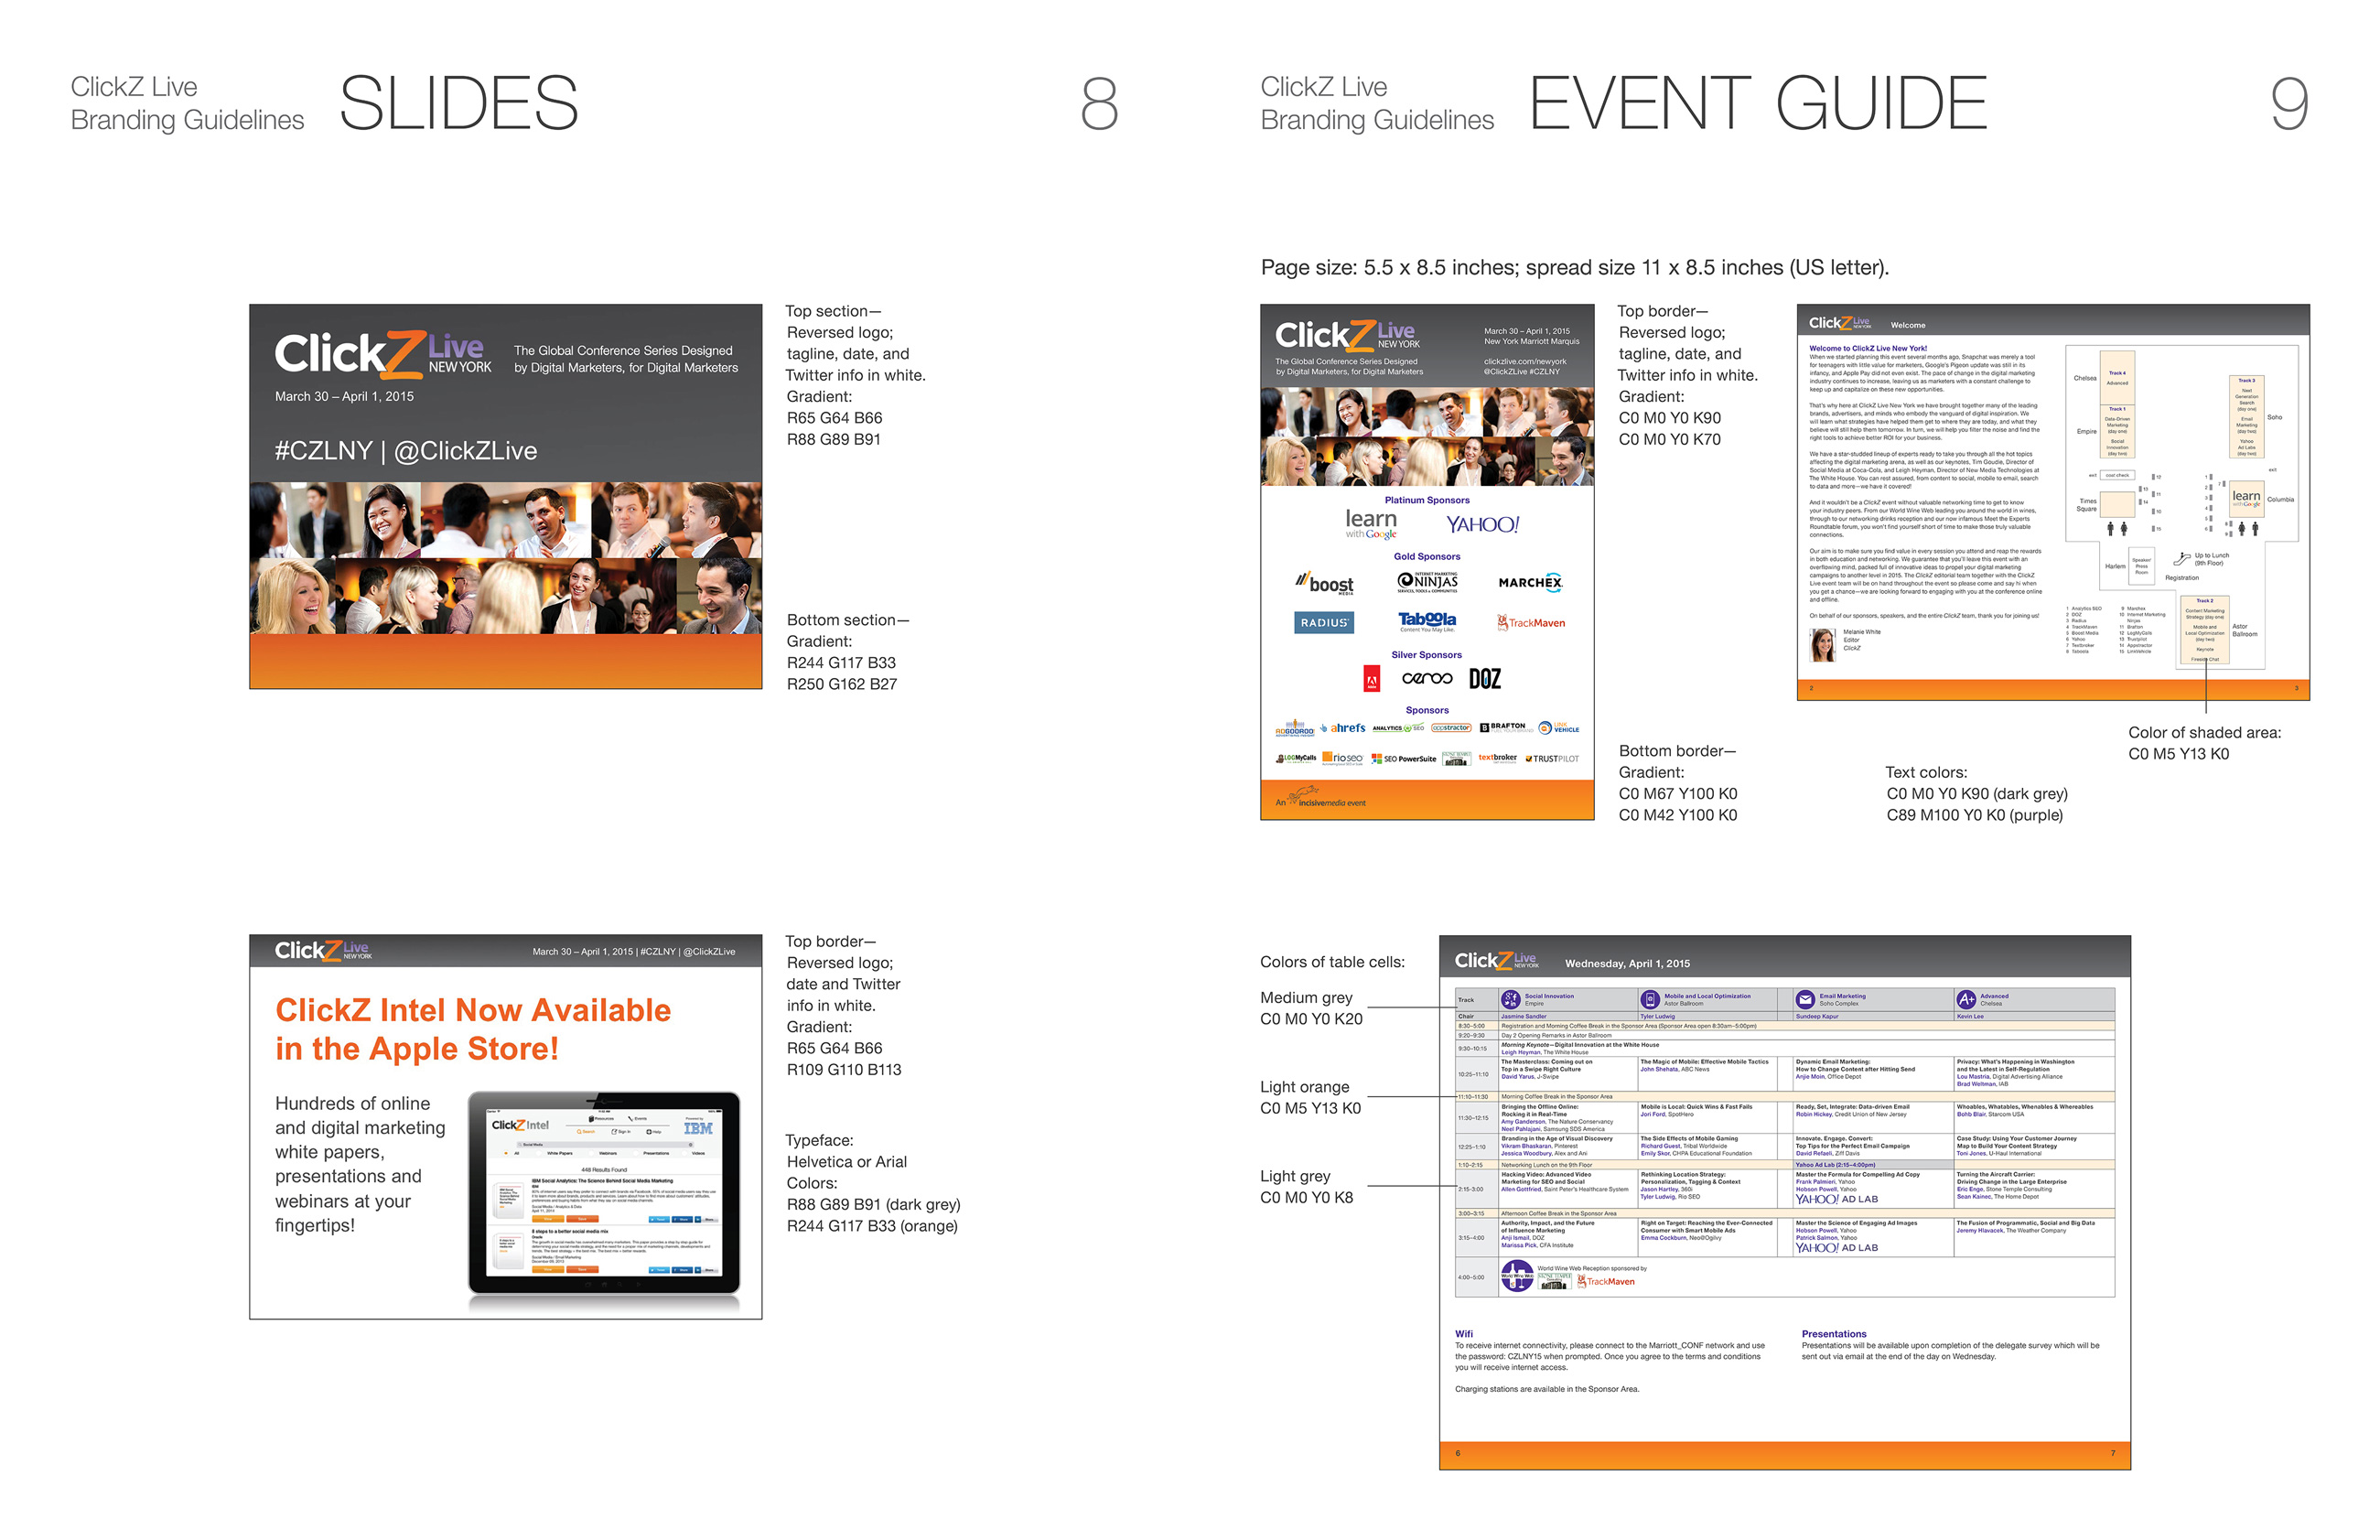 Spread from the branding guidelines for the ClickZ Live conference series. Shows examples of slides and event guides, with notations on sizes and colors.